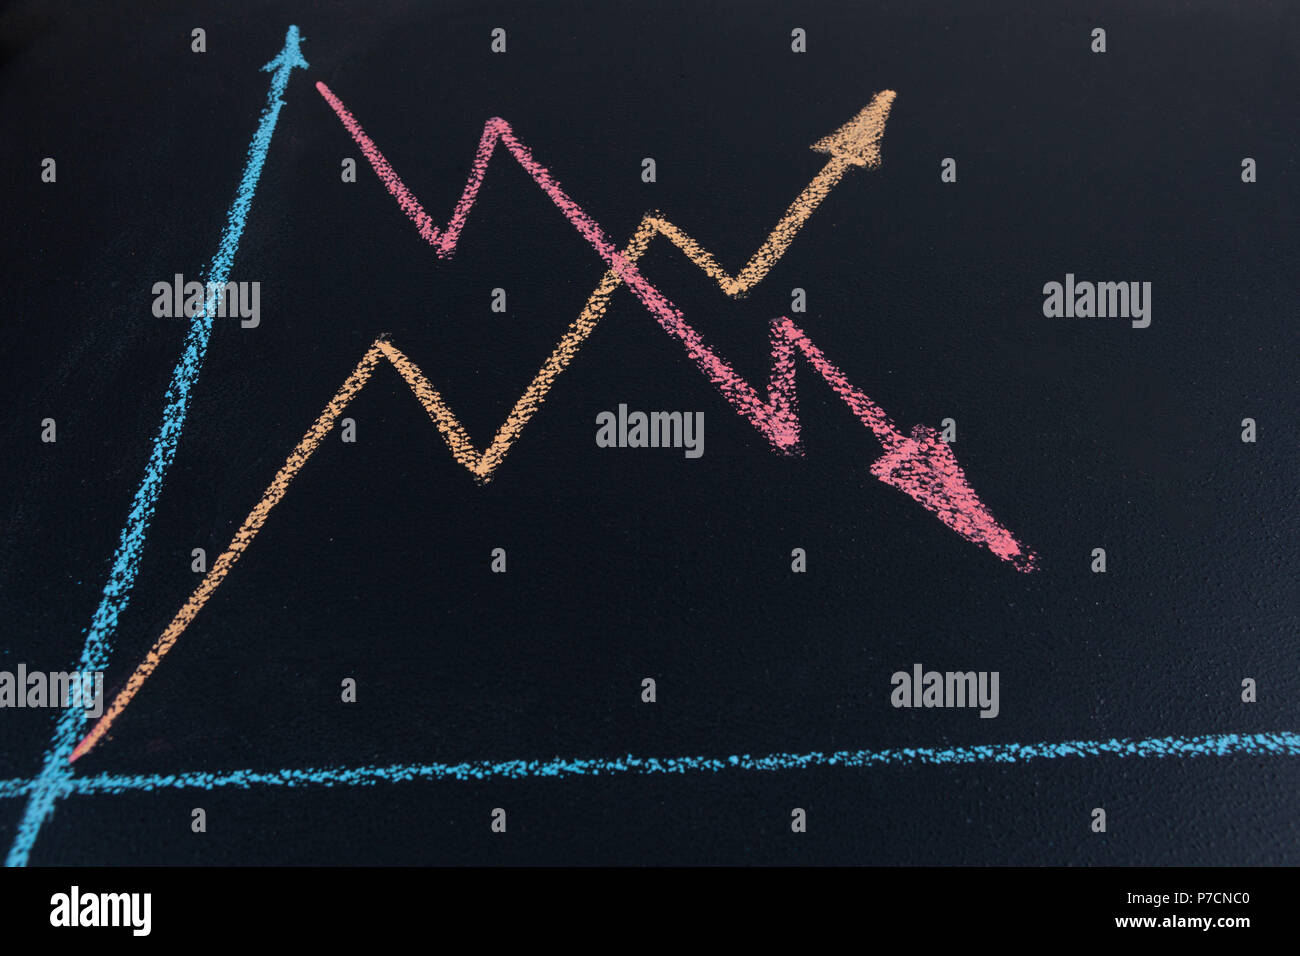 Line graph shoing upward and downward trends drawn with chalk on blackboard in perspective with copy space Stock Photo